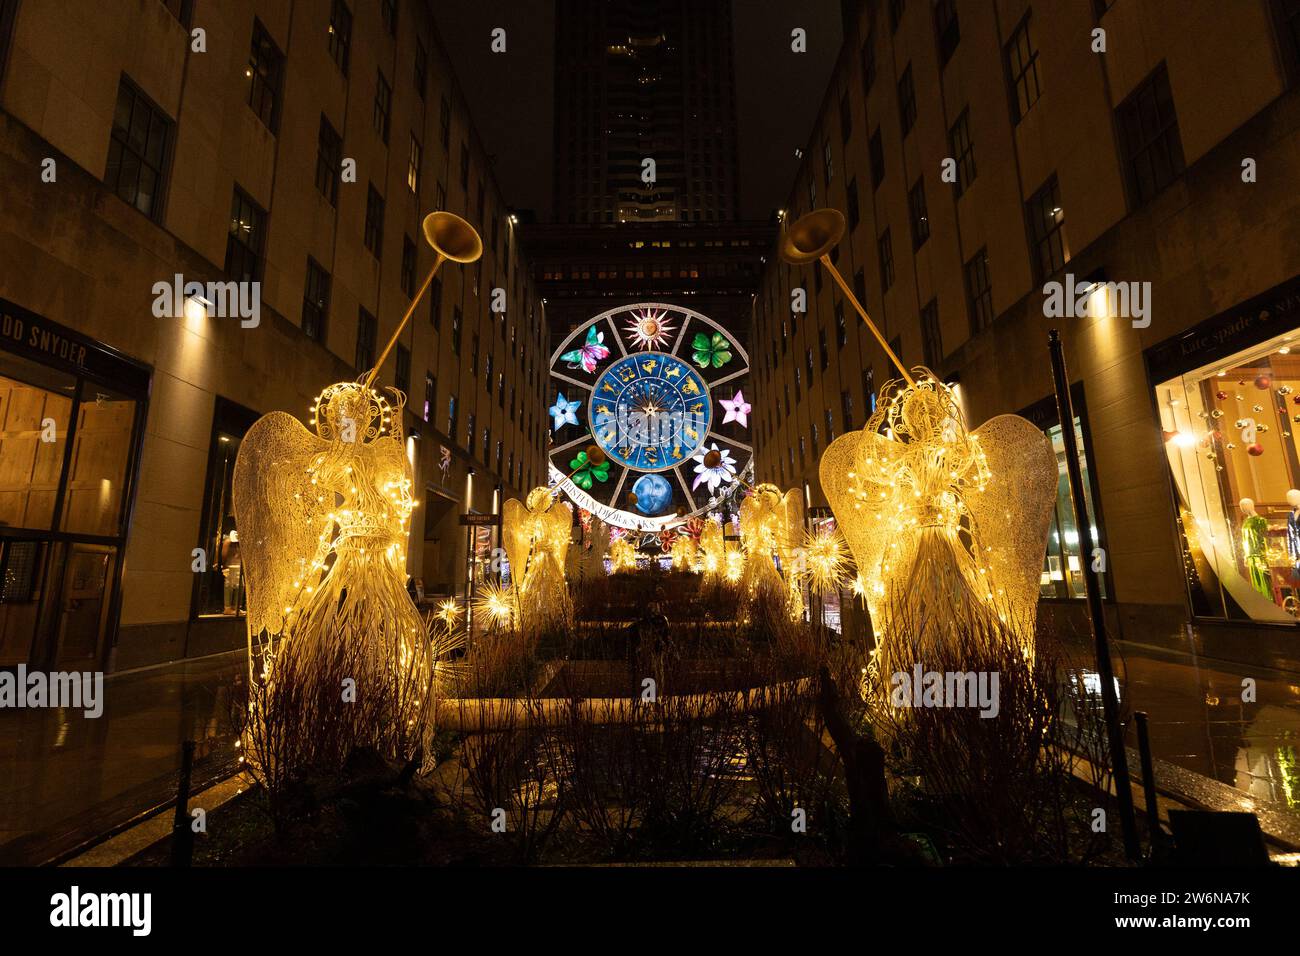 Looking from Rockefeller Center towards Christian Dior and Sak's Fifth Avenue's Carousel of Dreams at night. Stock Photo